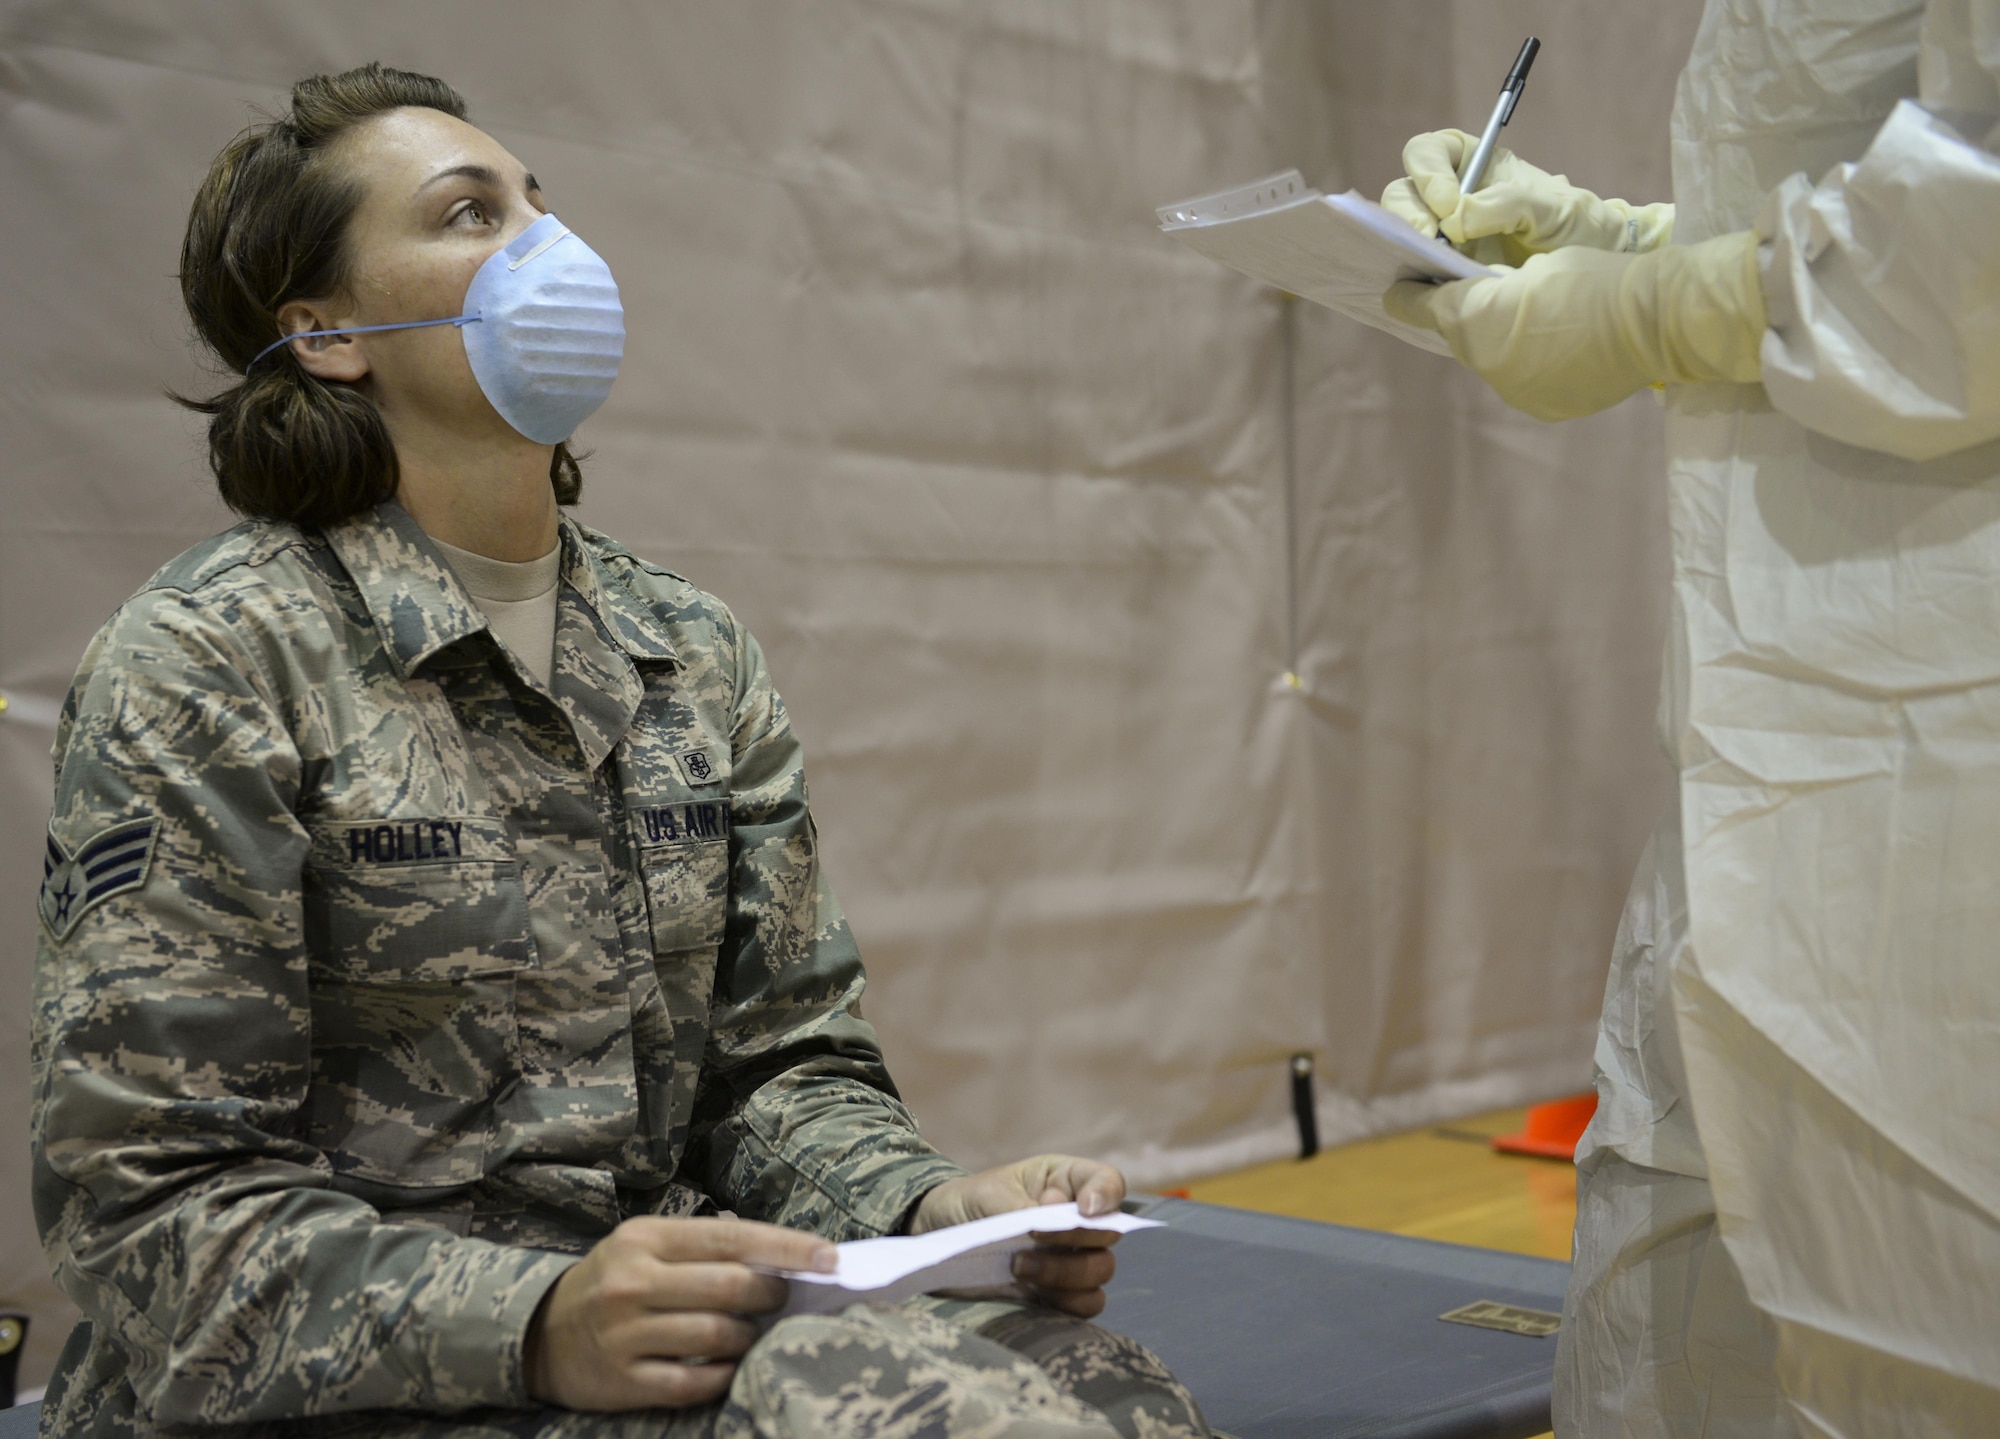 Senior Airman Rebecca Holley, 1st Special Operations Medical Group data quality manager, reports her simulated symptoms during a disease containment exercise at Hurlburt Field, Fla., Feb. 4, 2015. A total of 30 airmen were simulated patients. (U.S. Air Force photo Senior Airman Meagan Schutter/Released)